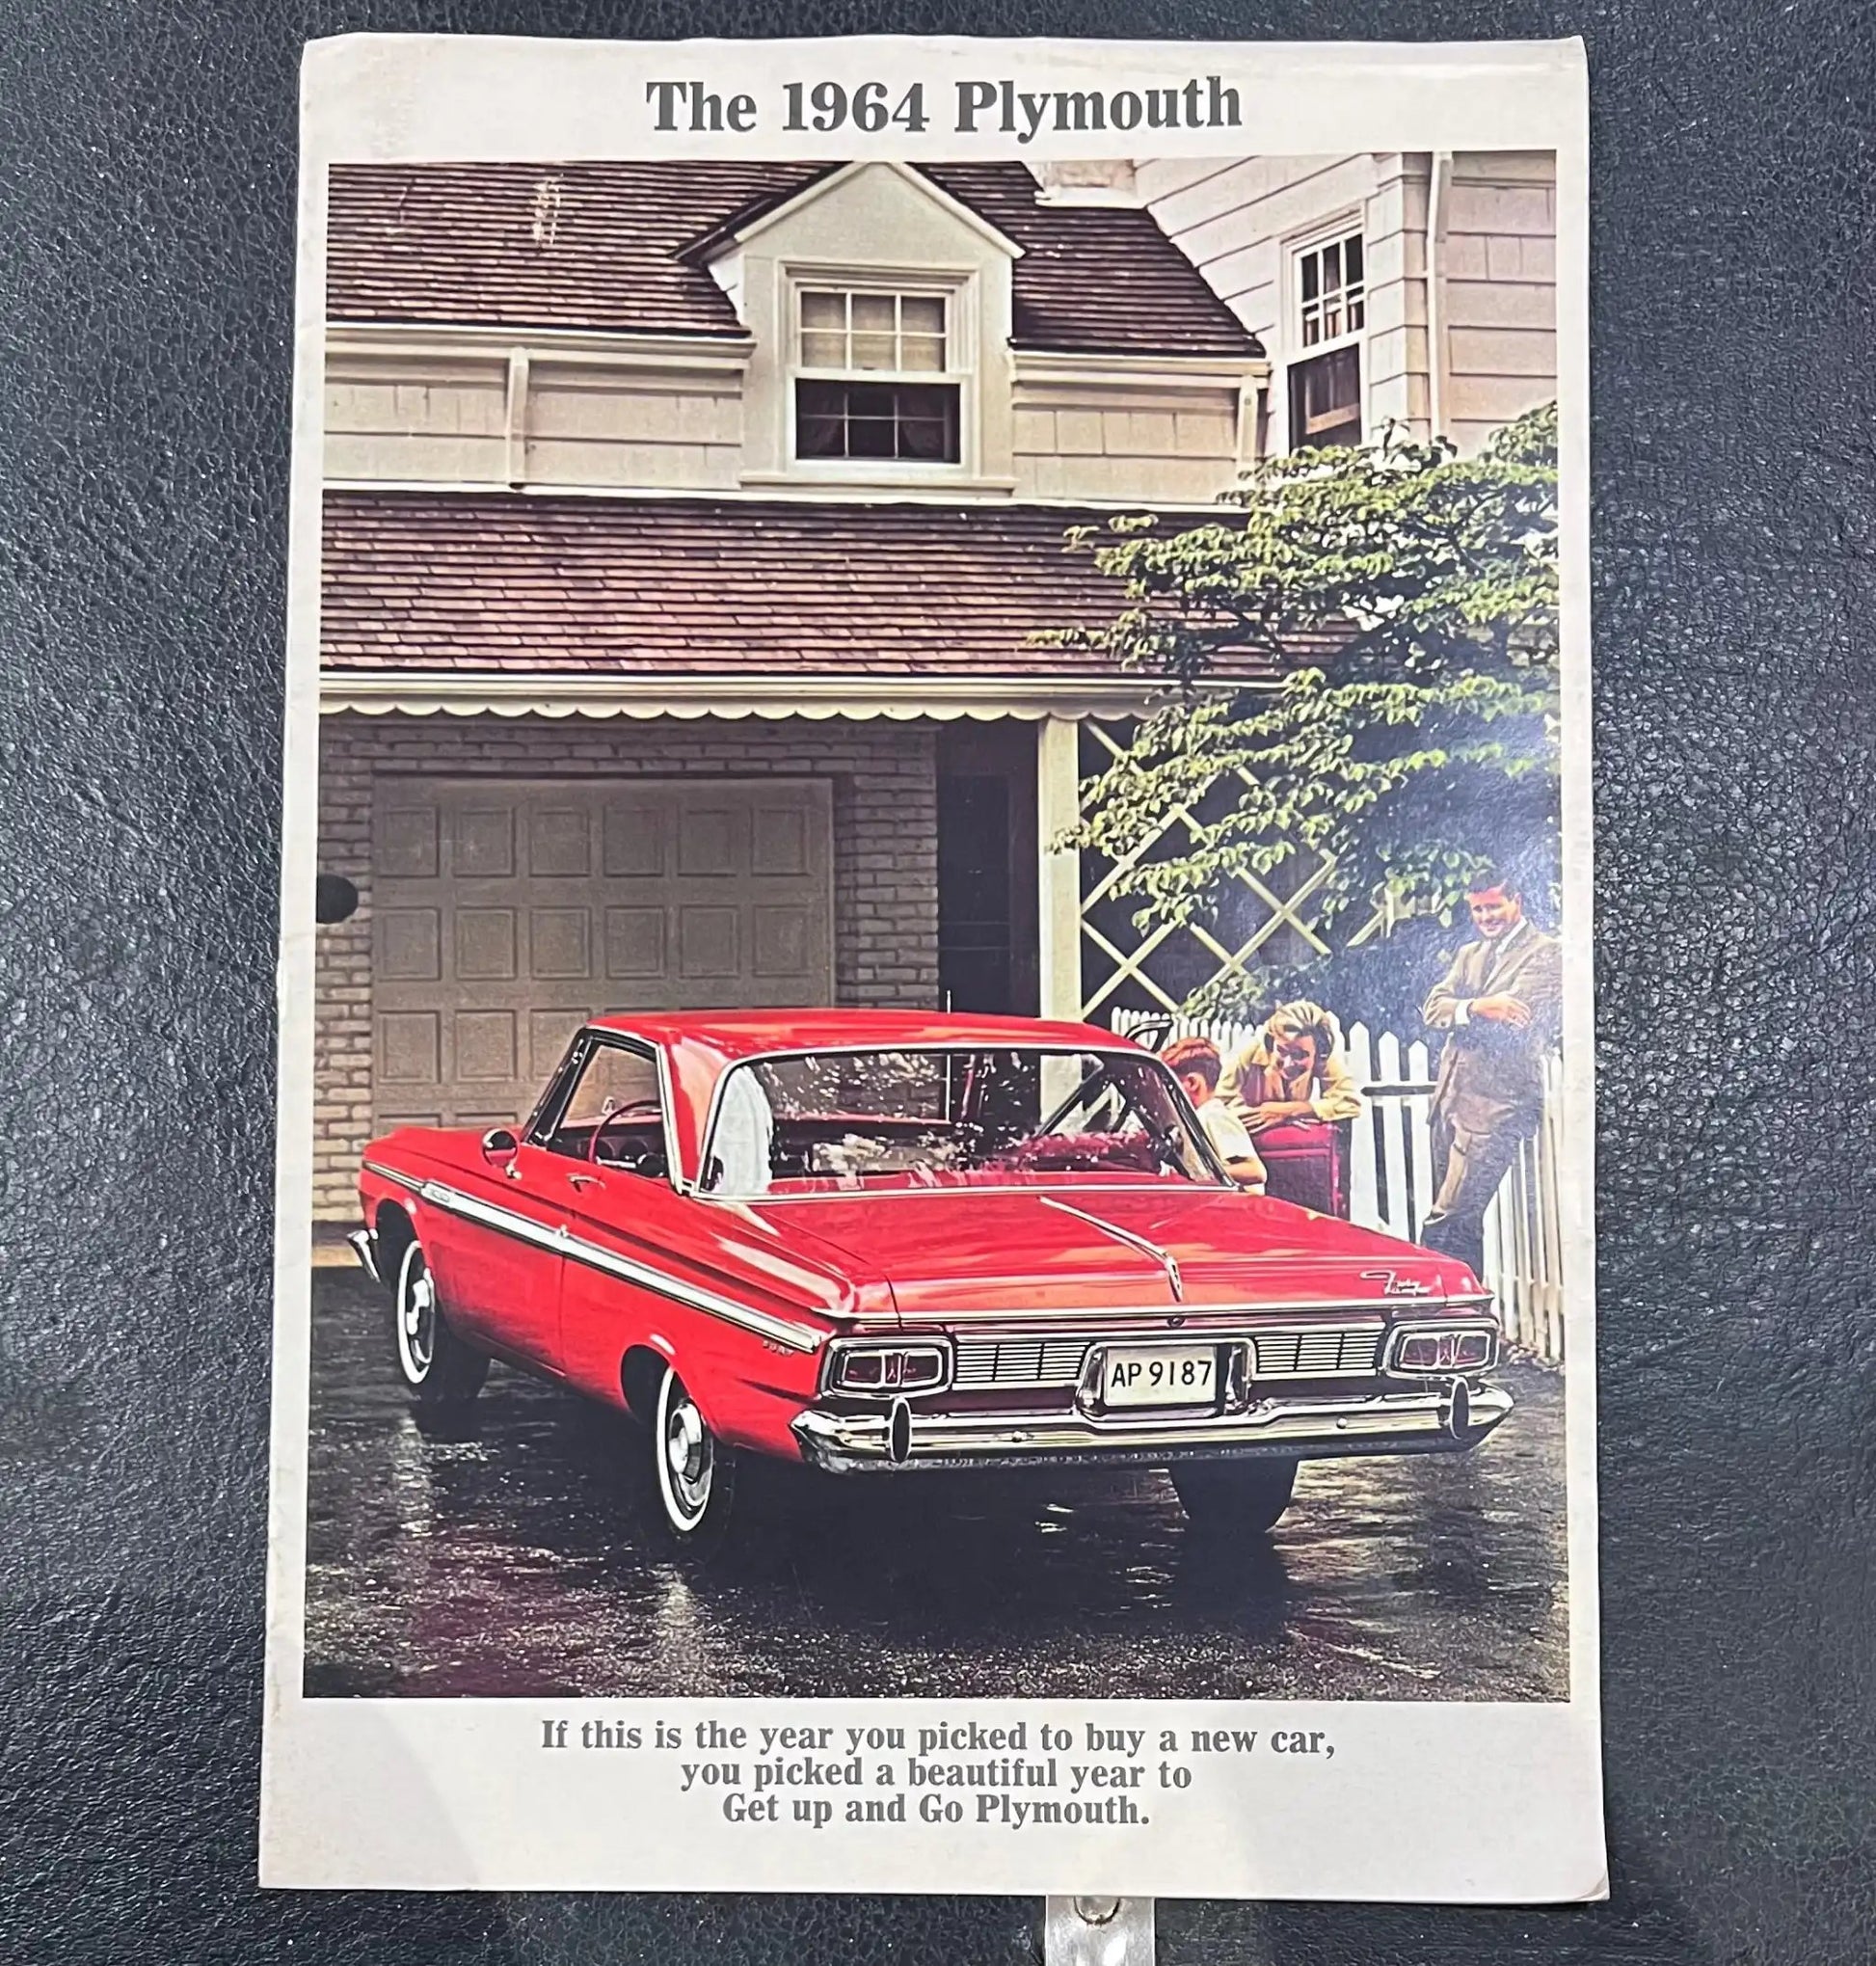 1964 Original Plymouth Fury Sport Belvedere Savoy Wagon Brochure NOS Relic has been stored safely away for decades and is in great NOS Condition A Must Have